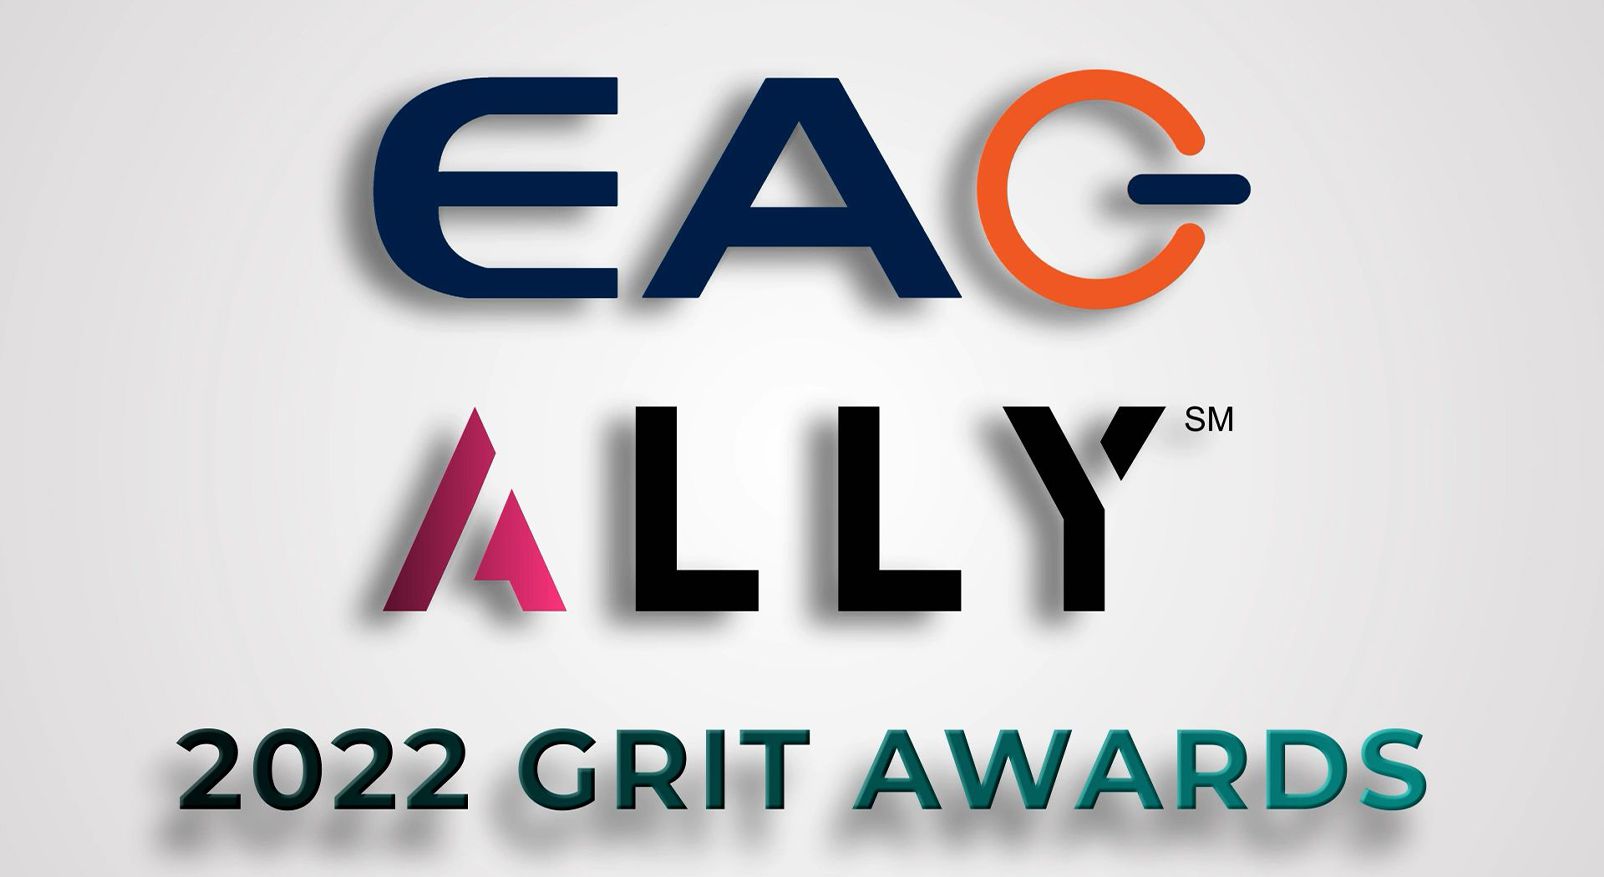 EAG Celebrates Receiving Recognition and Awards from ALLY ENERGY GRIT